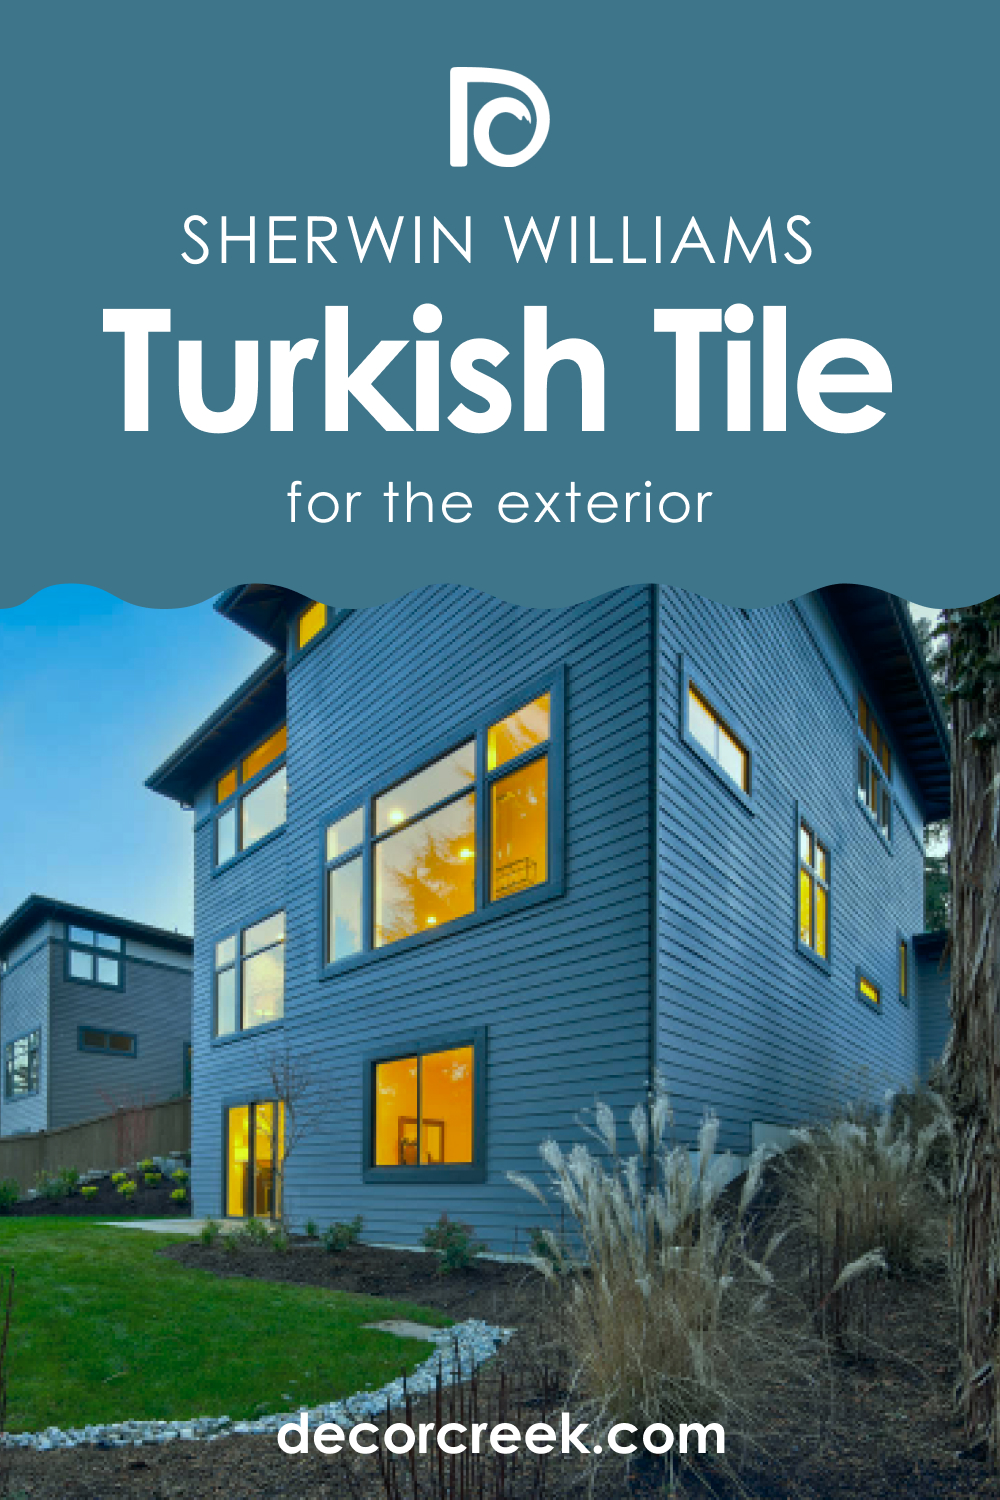 How to Use SW 7610 Turkish Tile for an Exterior?